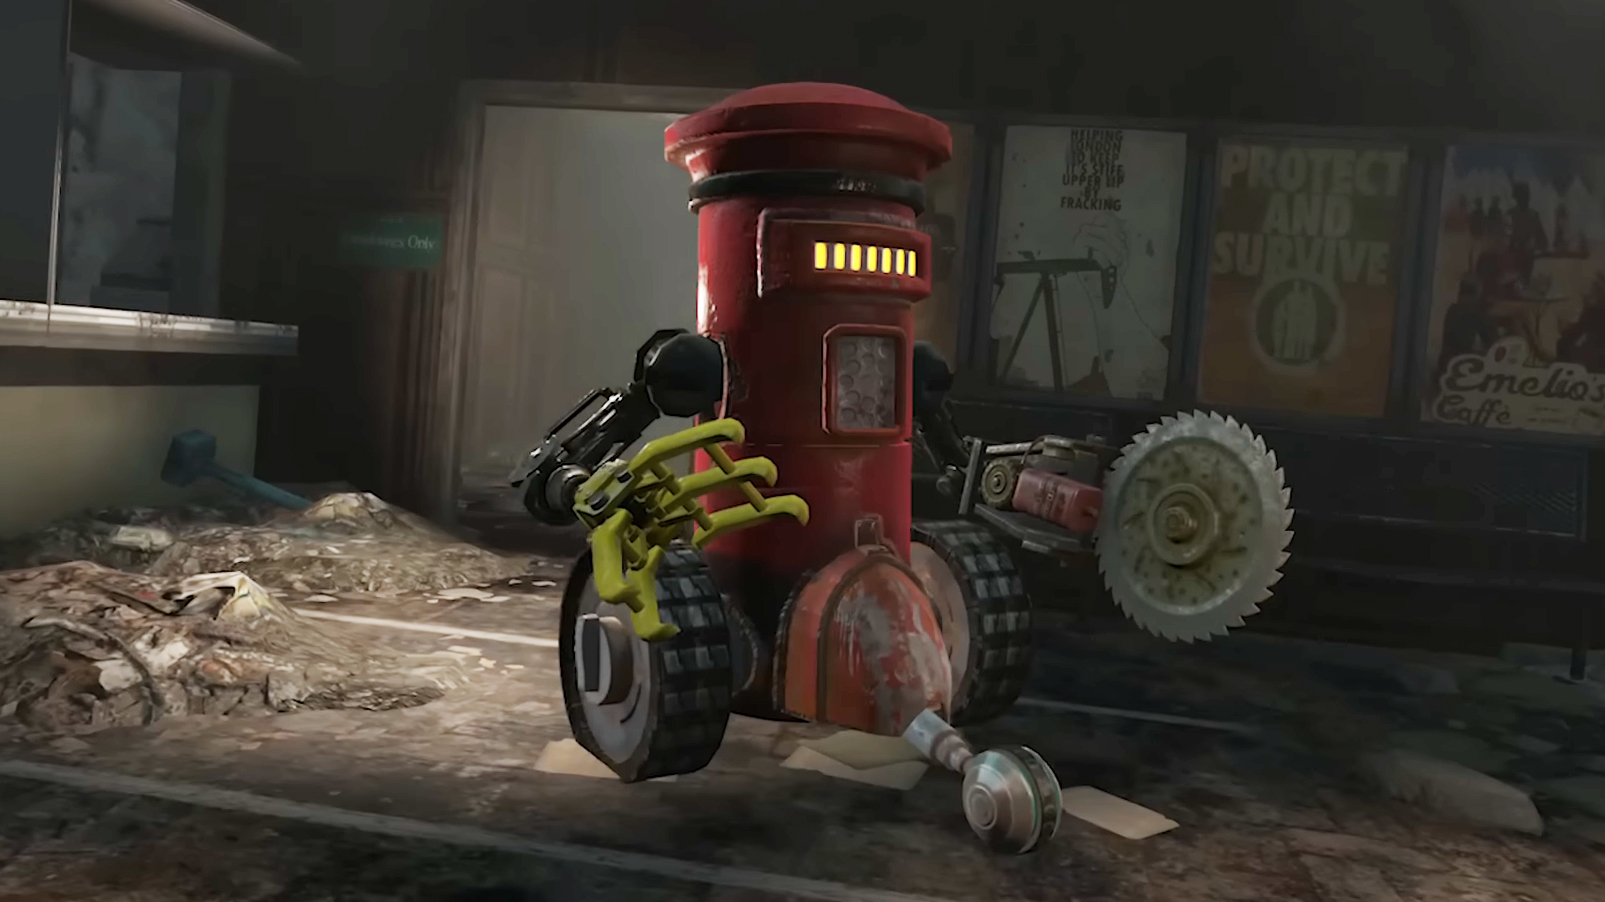 Postbox robot with weapons